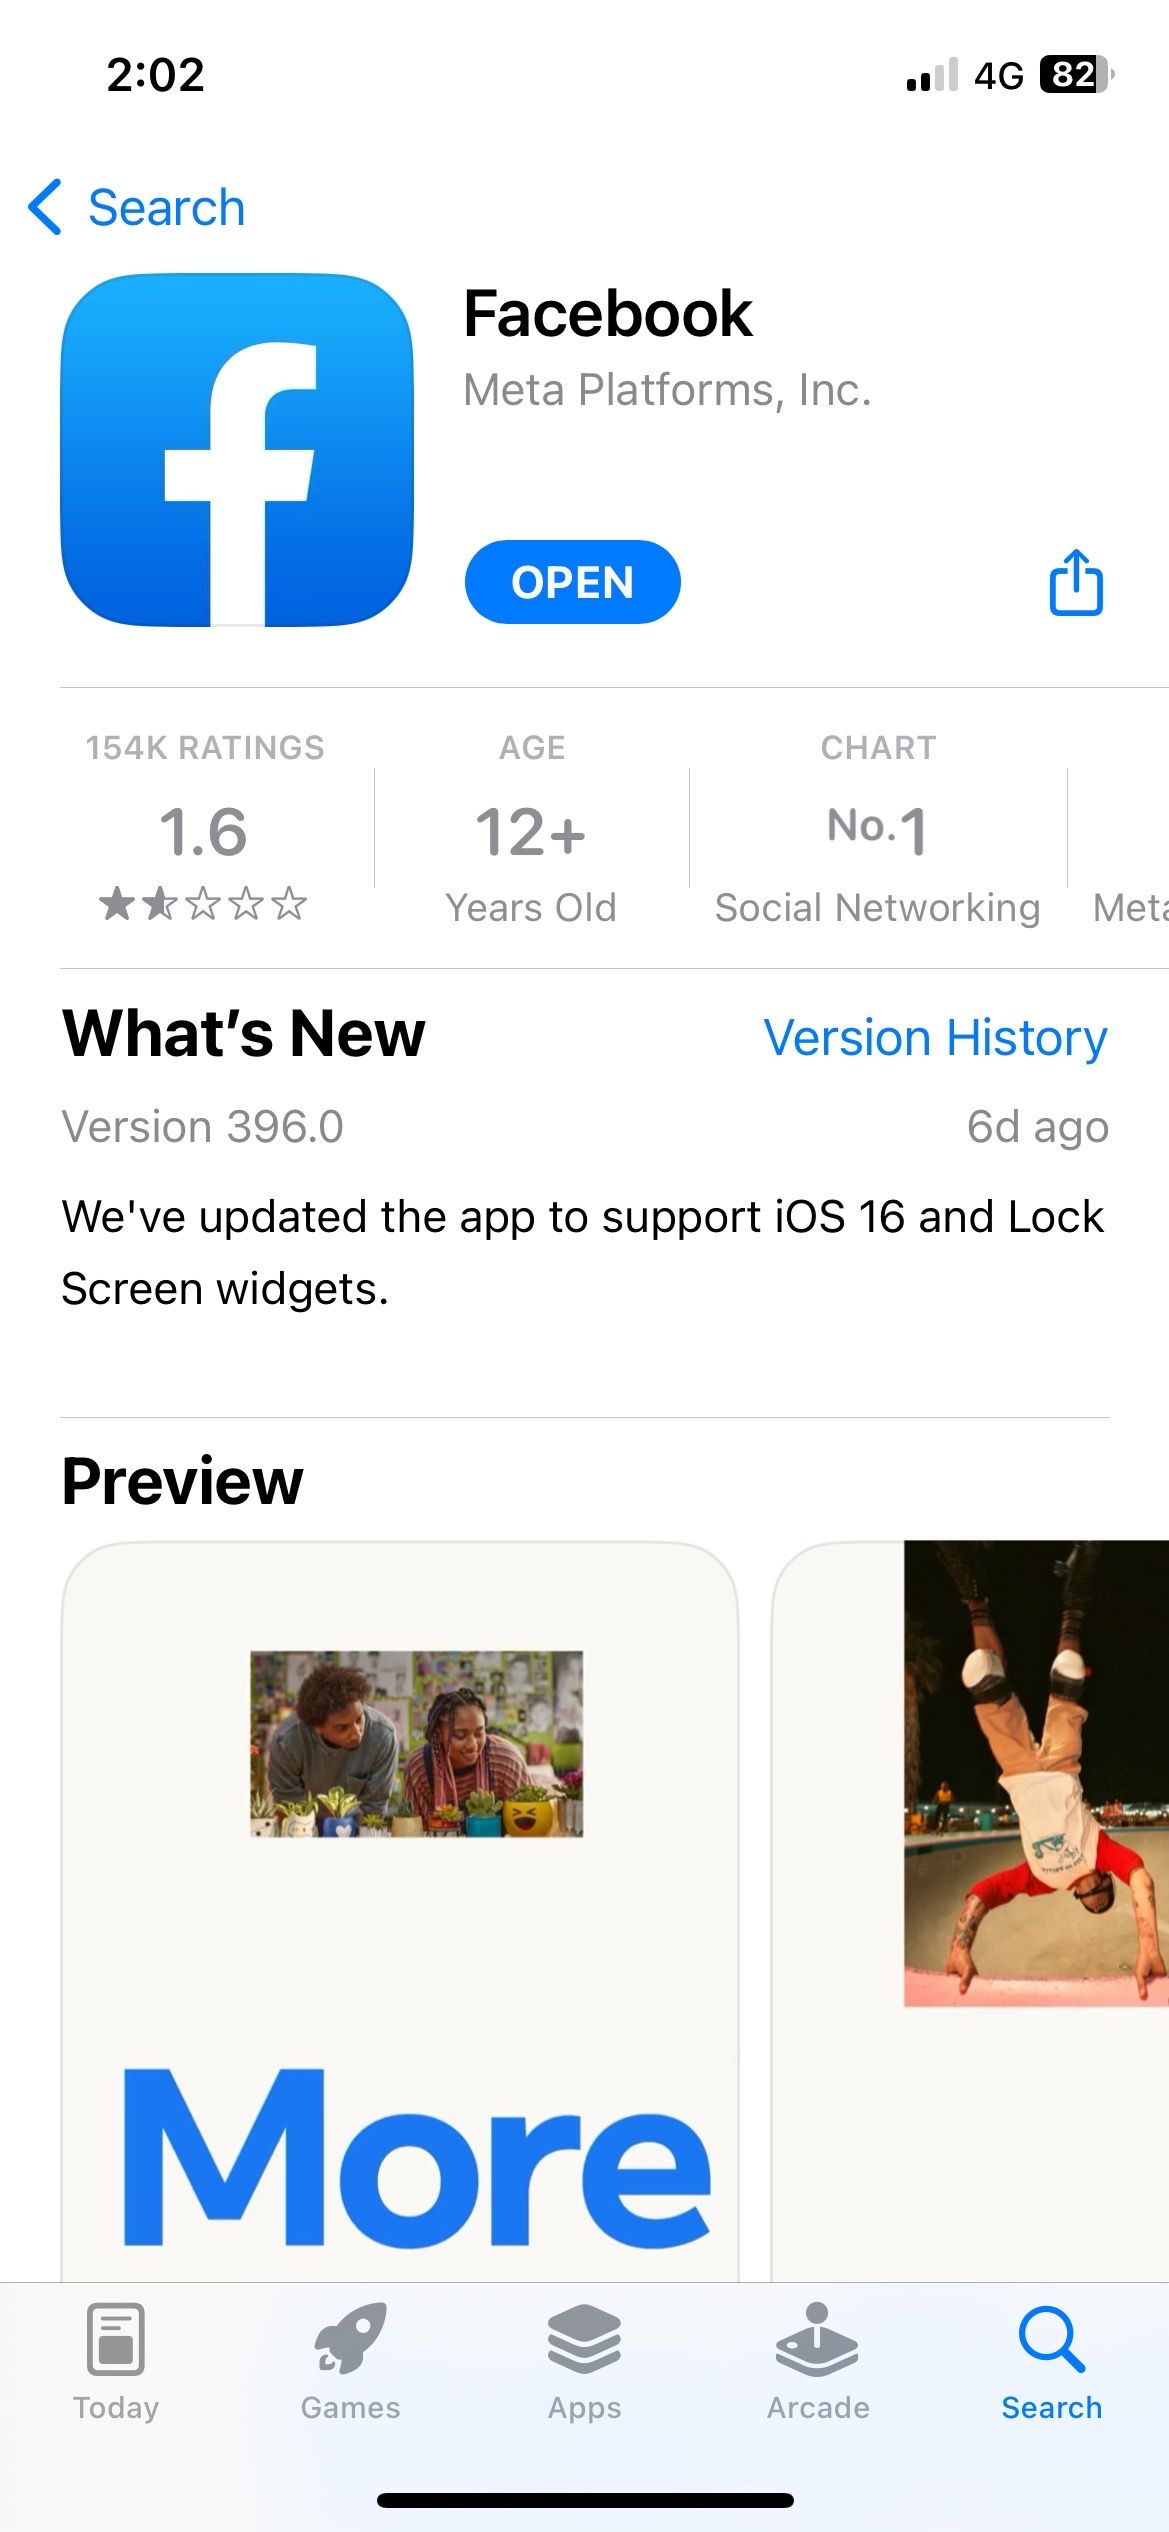 Open Facebook from the App Store